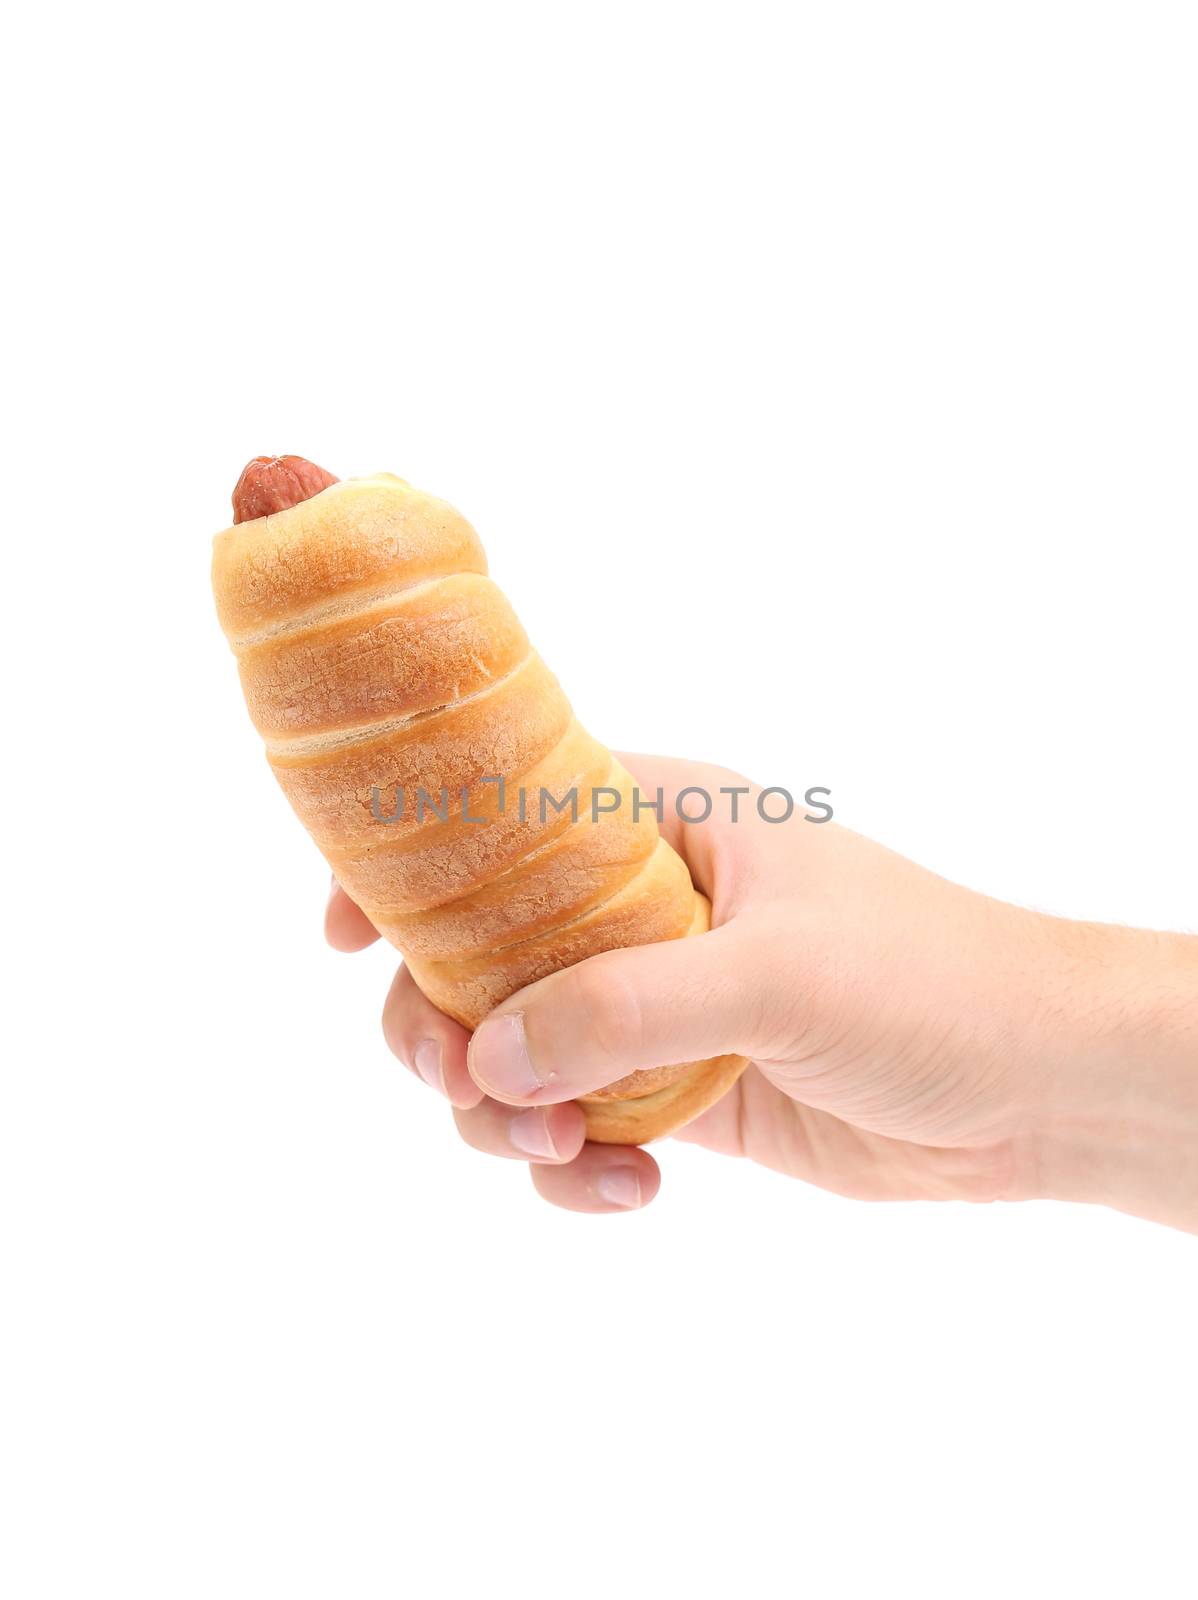 Hand holds hot dog baked. Isolated on a white background.